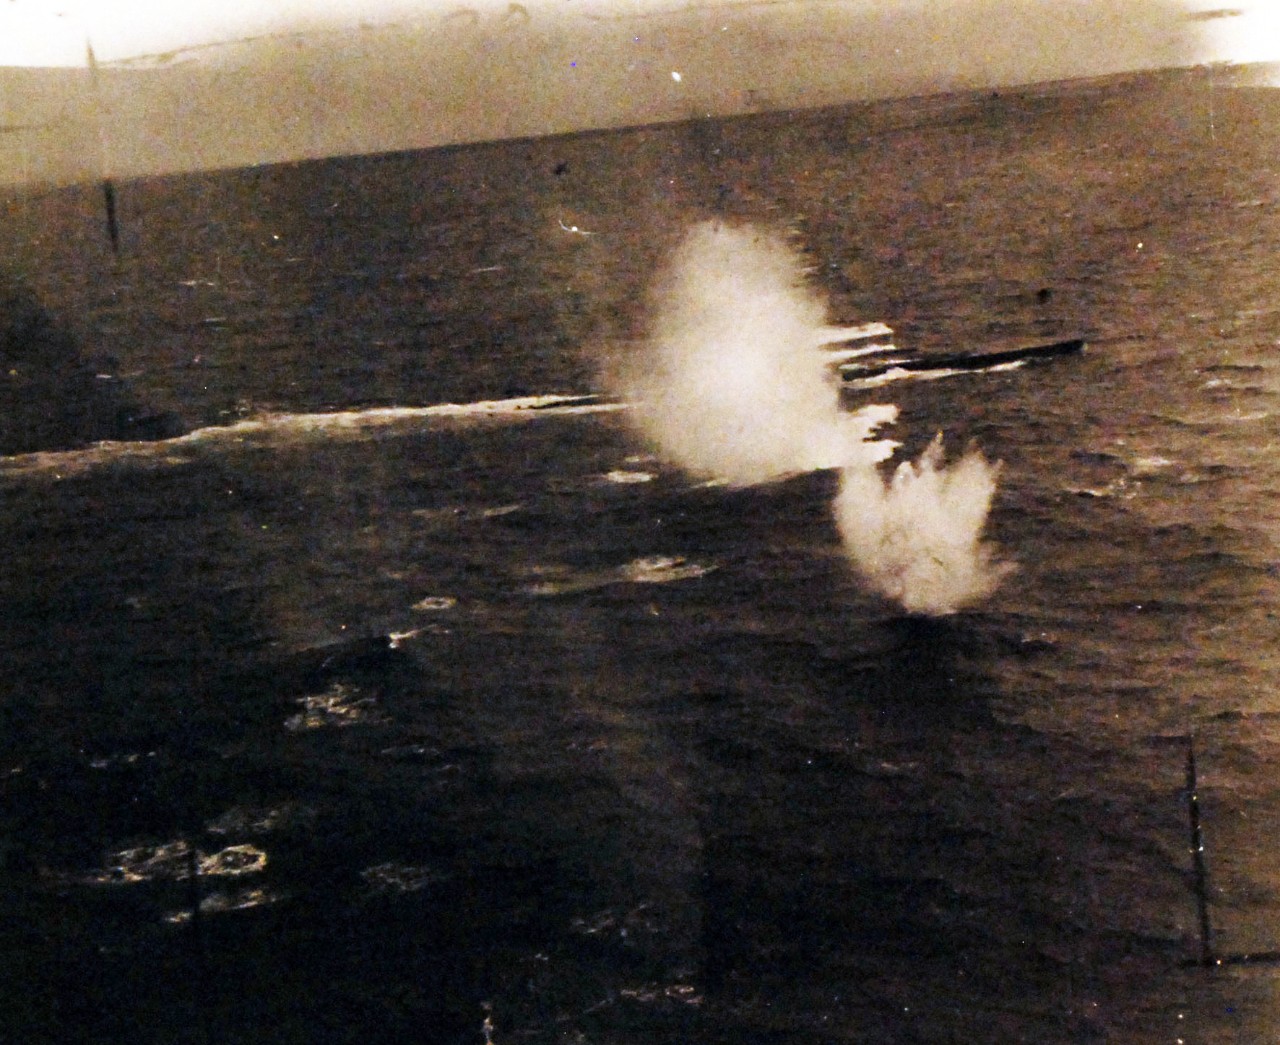 <p>80-G-49783:&nbsp; Air Attack on German U-boats, WWII.&nbsp;&nbsp; Attack on German submarine, U-550,&nbsp; by U.S. Navy and Army planes in the Atlantic, November 1943.&nbsp;&nbsp; A moment after bombs are released swirls where they entered water can be seen. &nbsp;U-505 would later be rammed depth charged and shelled by USS Gandy (DE 764), USS Joyce (DE 317), and USS Peterson (DE 152), the German submarine U-550 was sunk on April 16, 1944.&nbsp;&nbsp; Released July 2, 1945.&nbsp; &nbsp;</p>
